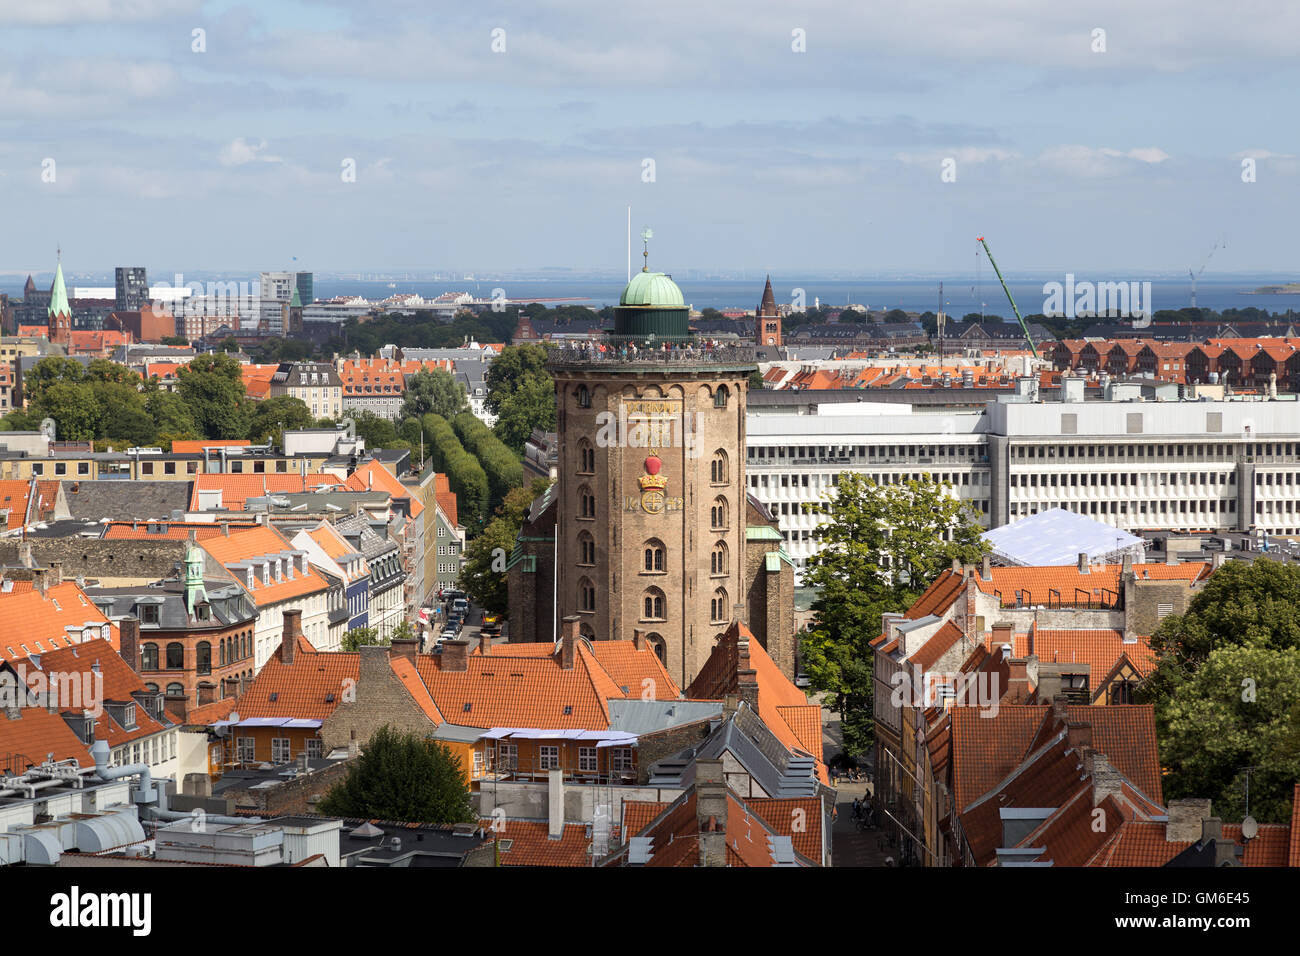 Copenhagen, Denmark - August 15, 2016: Aerial view of the Round Tower in the city center Stock Photo